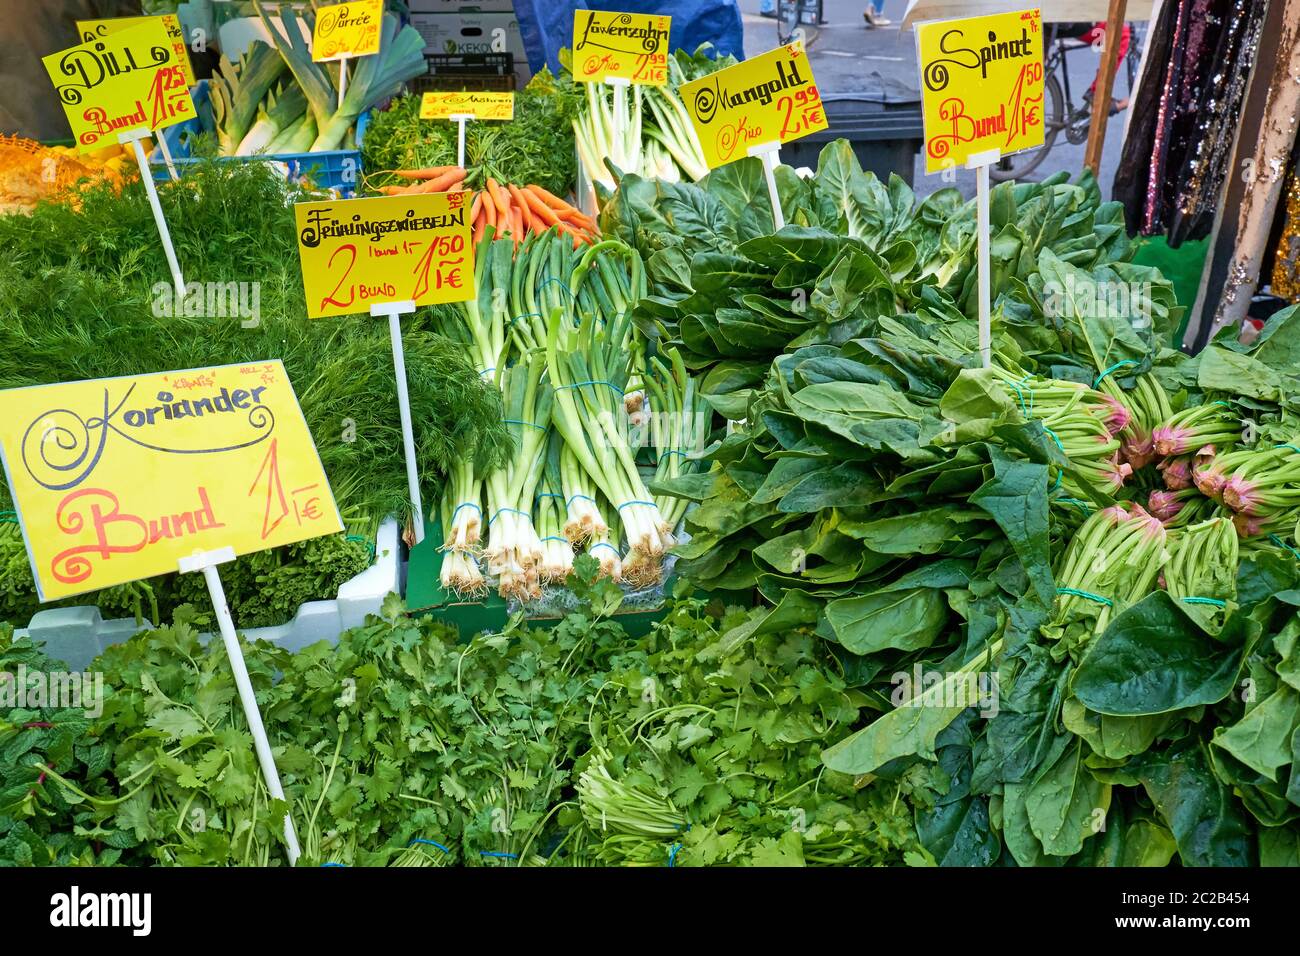 Herbs and vegetables for sale at a market Stock Photo